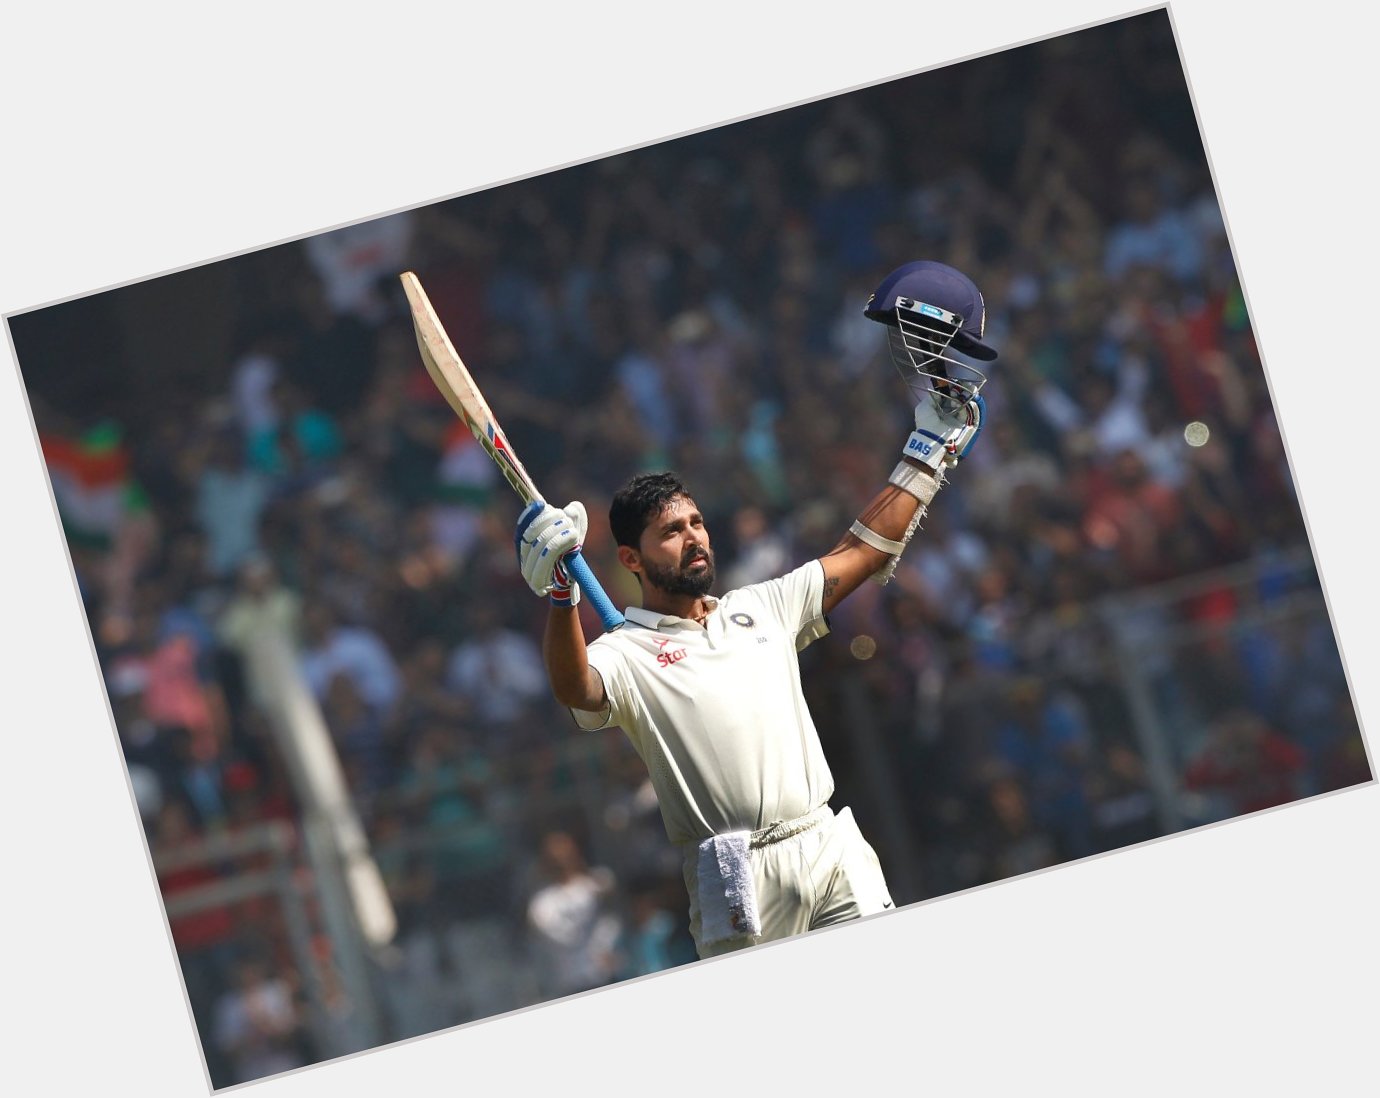 Happy Birthday to an India opener who has played 51 Tests, scoring 9 centuries and 15 fifties - Murali Vijay 